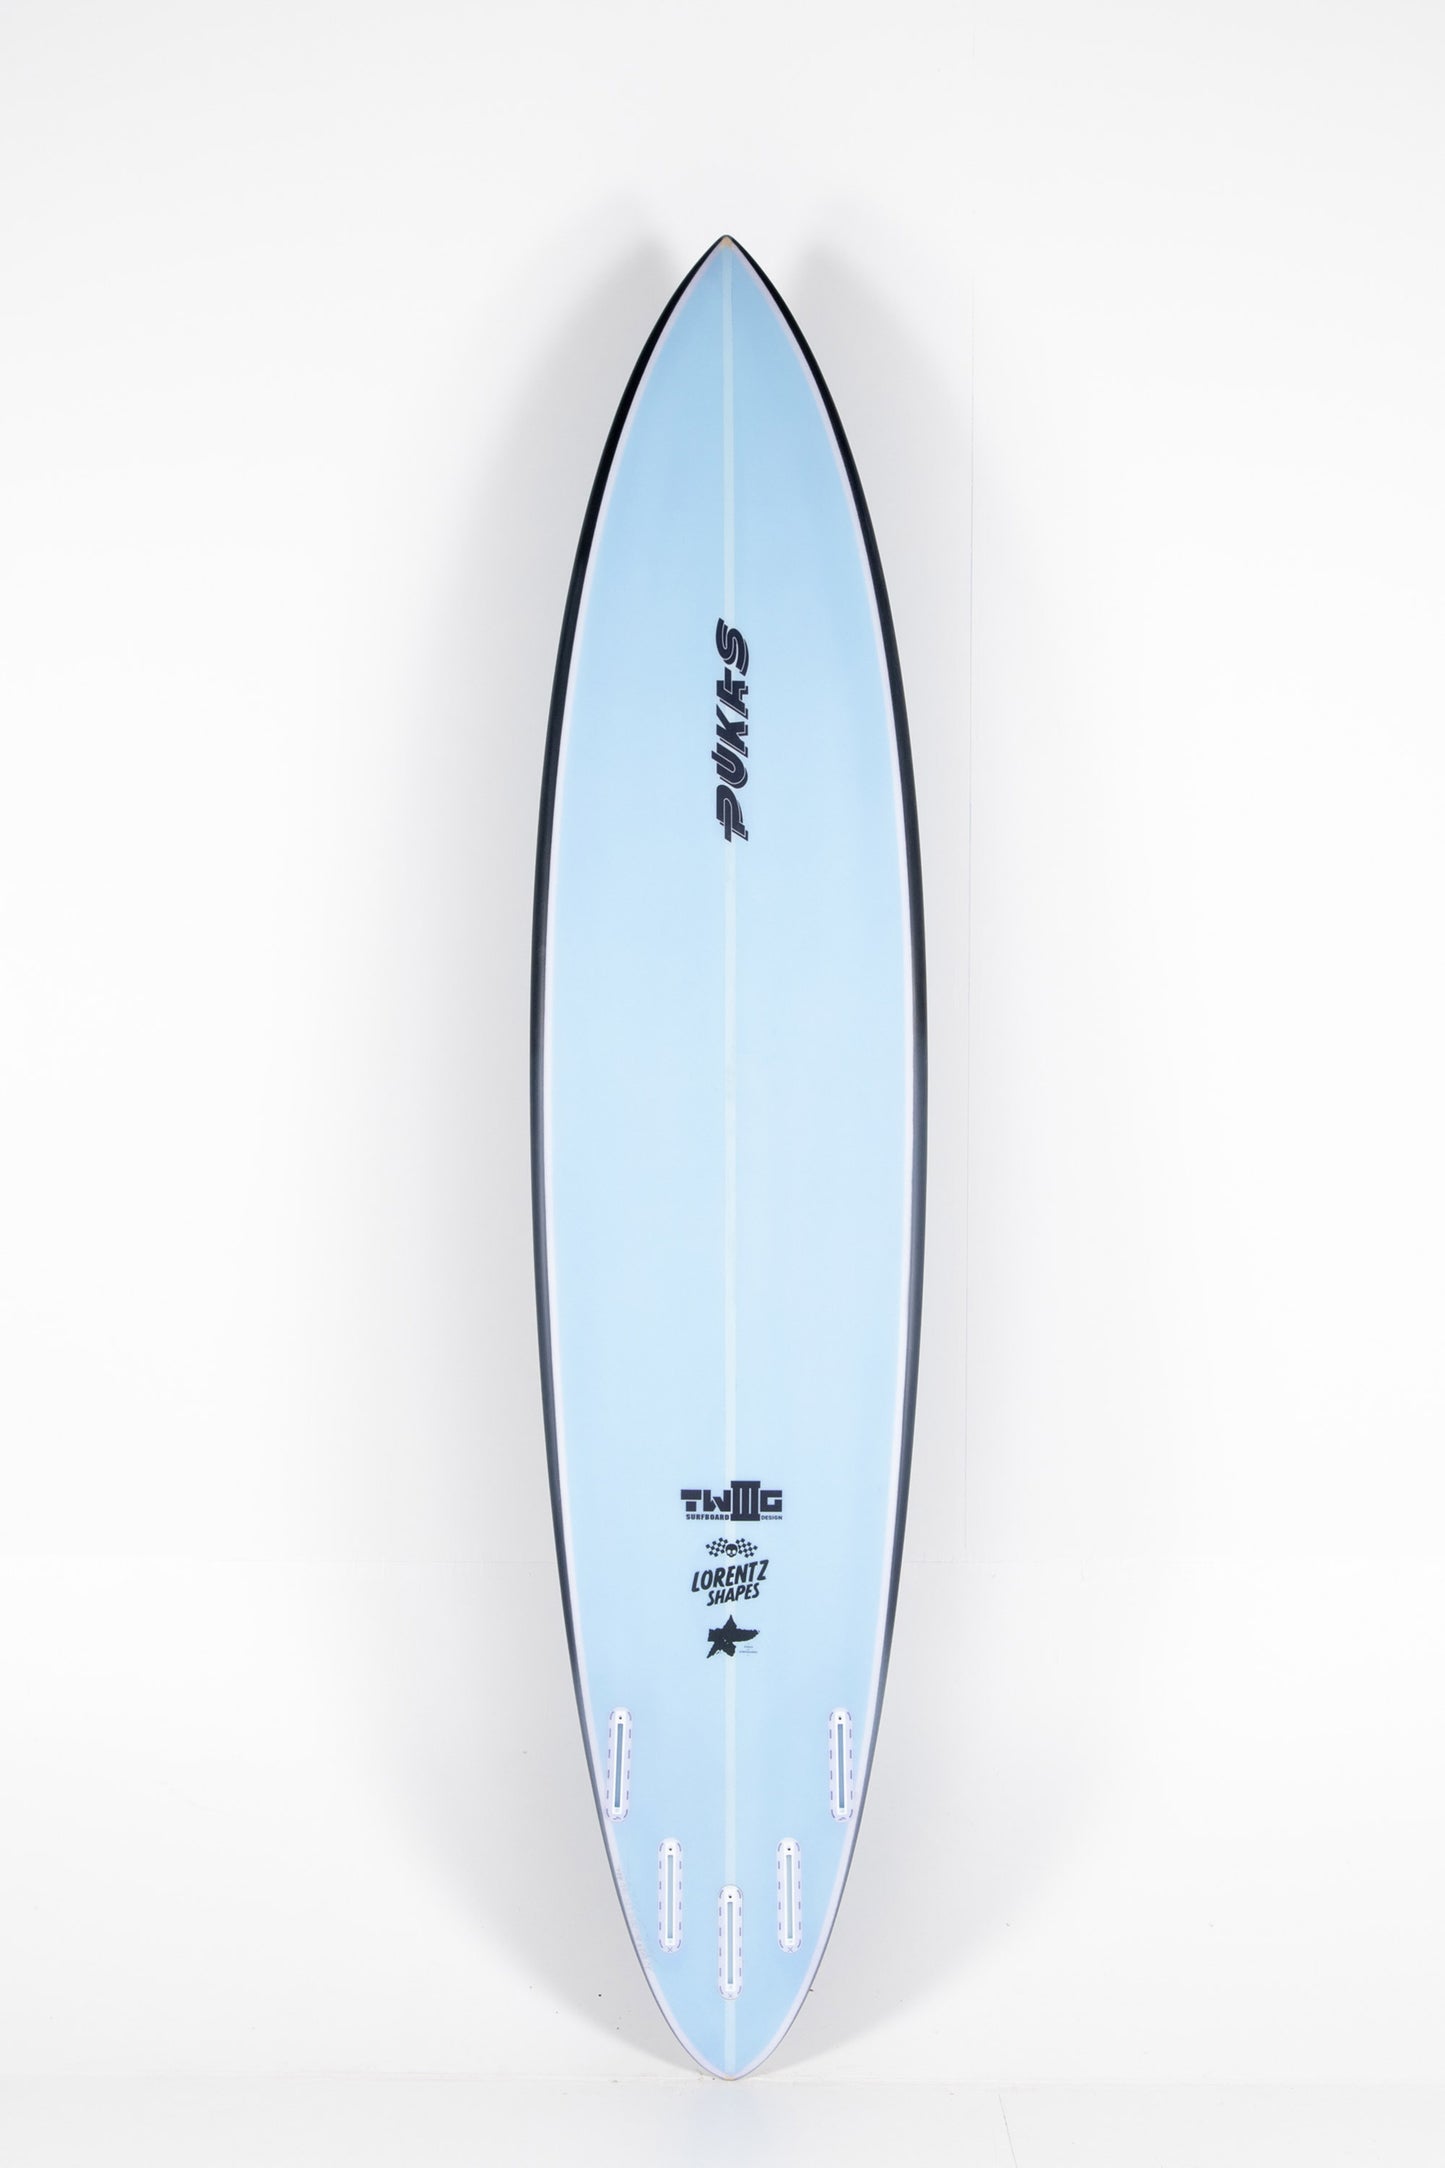 Pukas Surf Shop - Pukas Surfboard - TWIG CHARGER by Axel Lorentz - 8´0” x 20 1/8 x 3 1/4 - 53L  AX04827